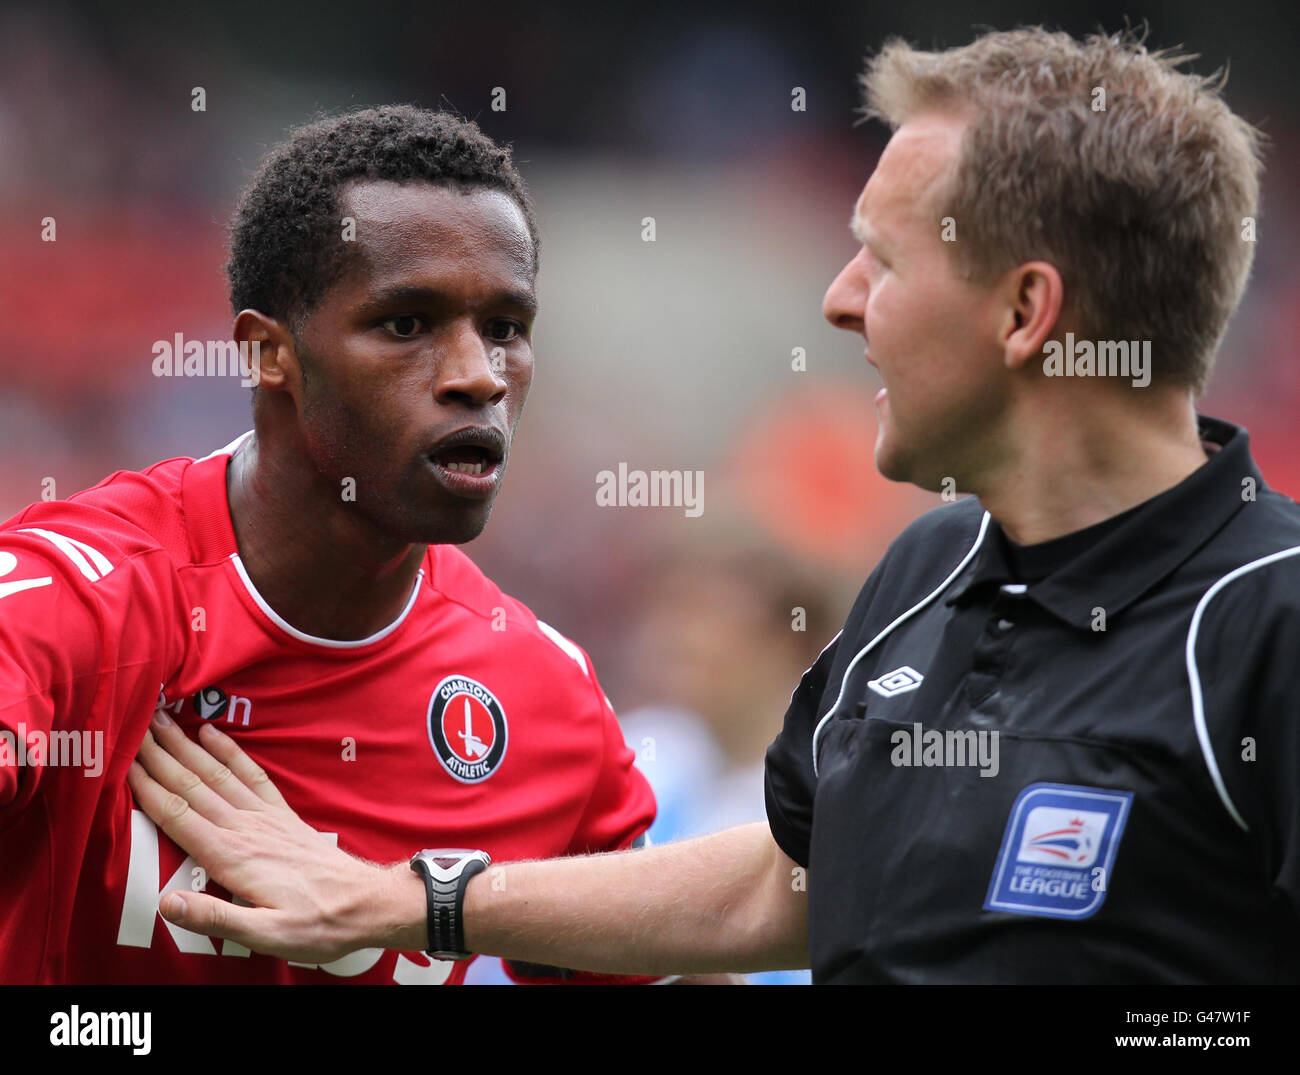 Charlton Athletic's captain Jose Semedo with referee Langford during the npower Football League One match at The Valley, London. Stock Photo